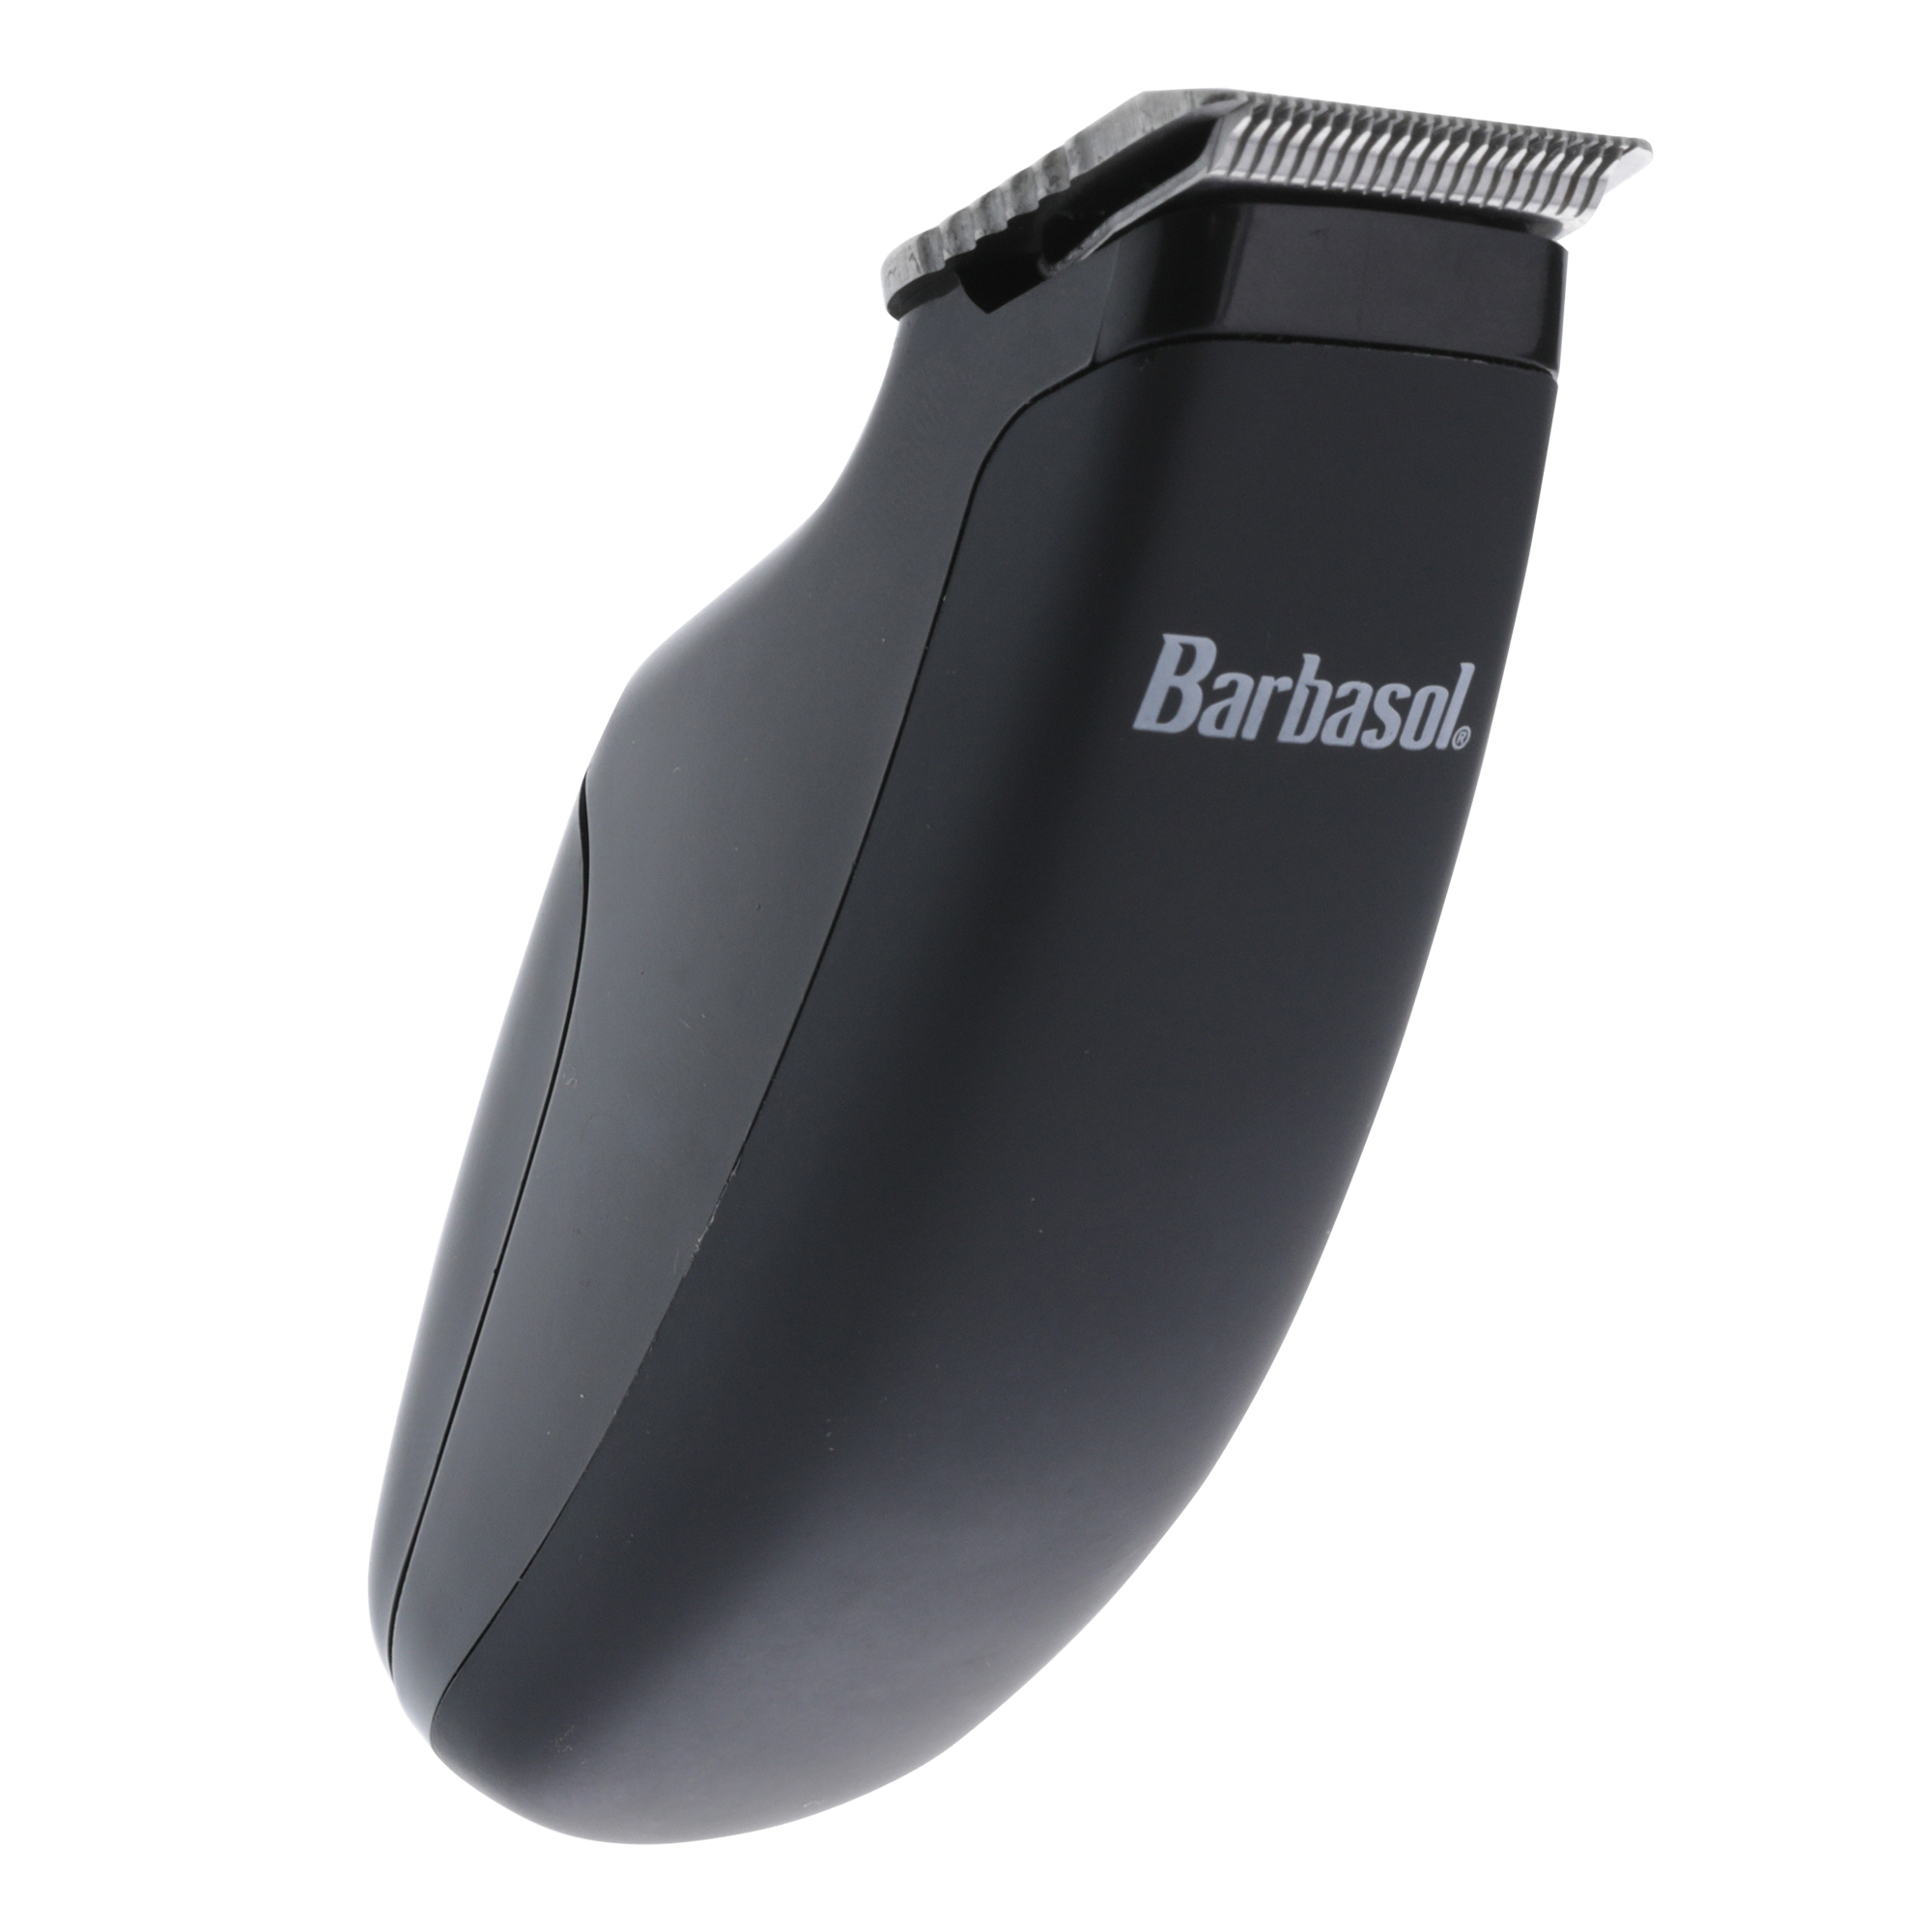 cosyonall clippers reviews